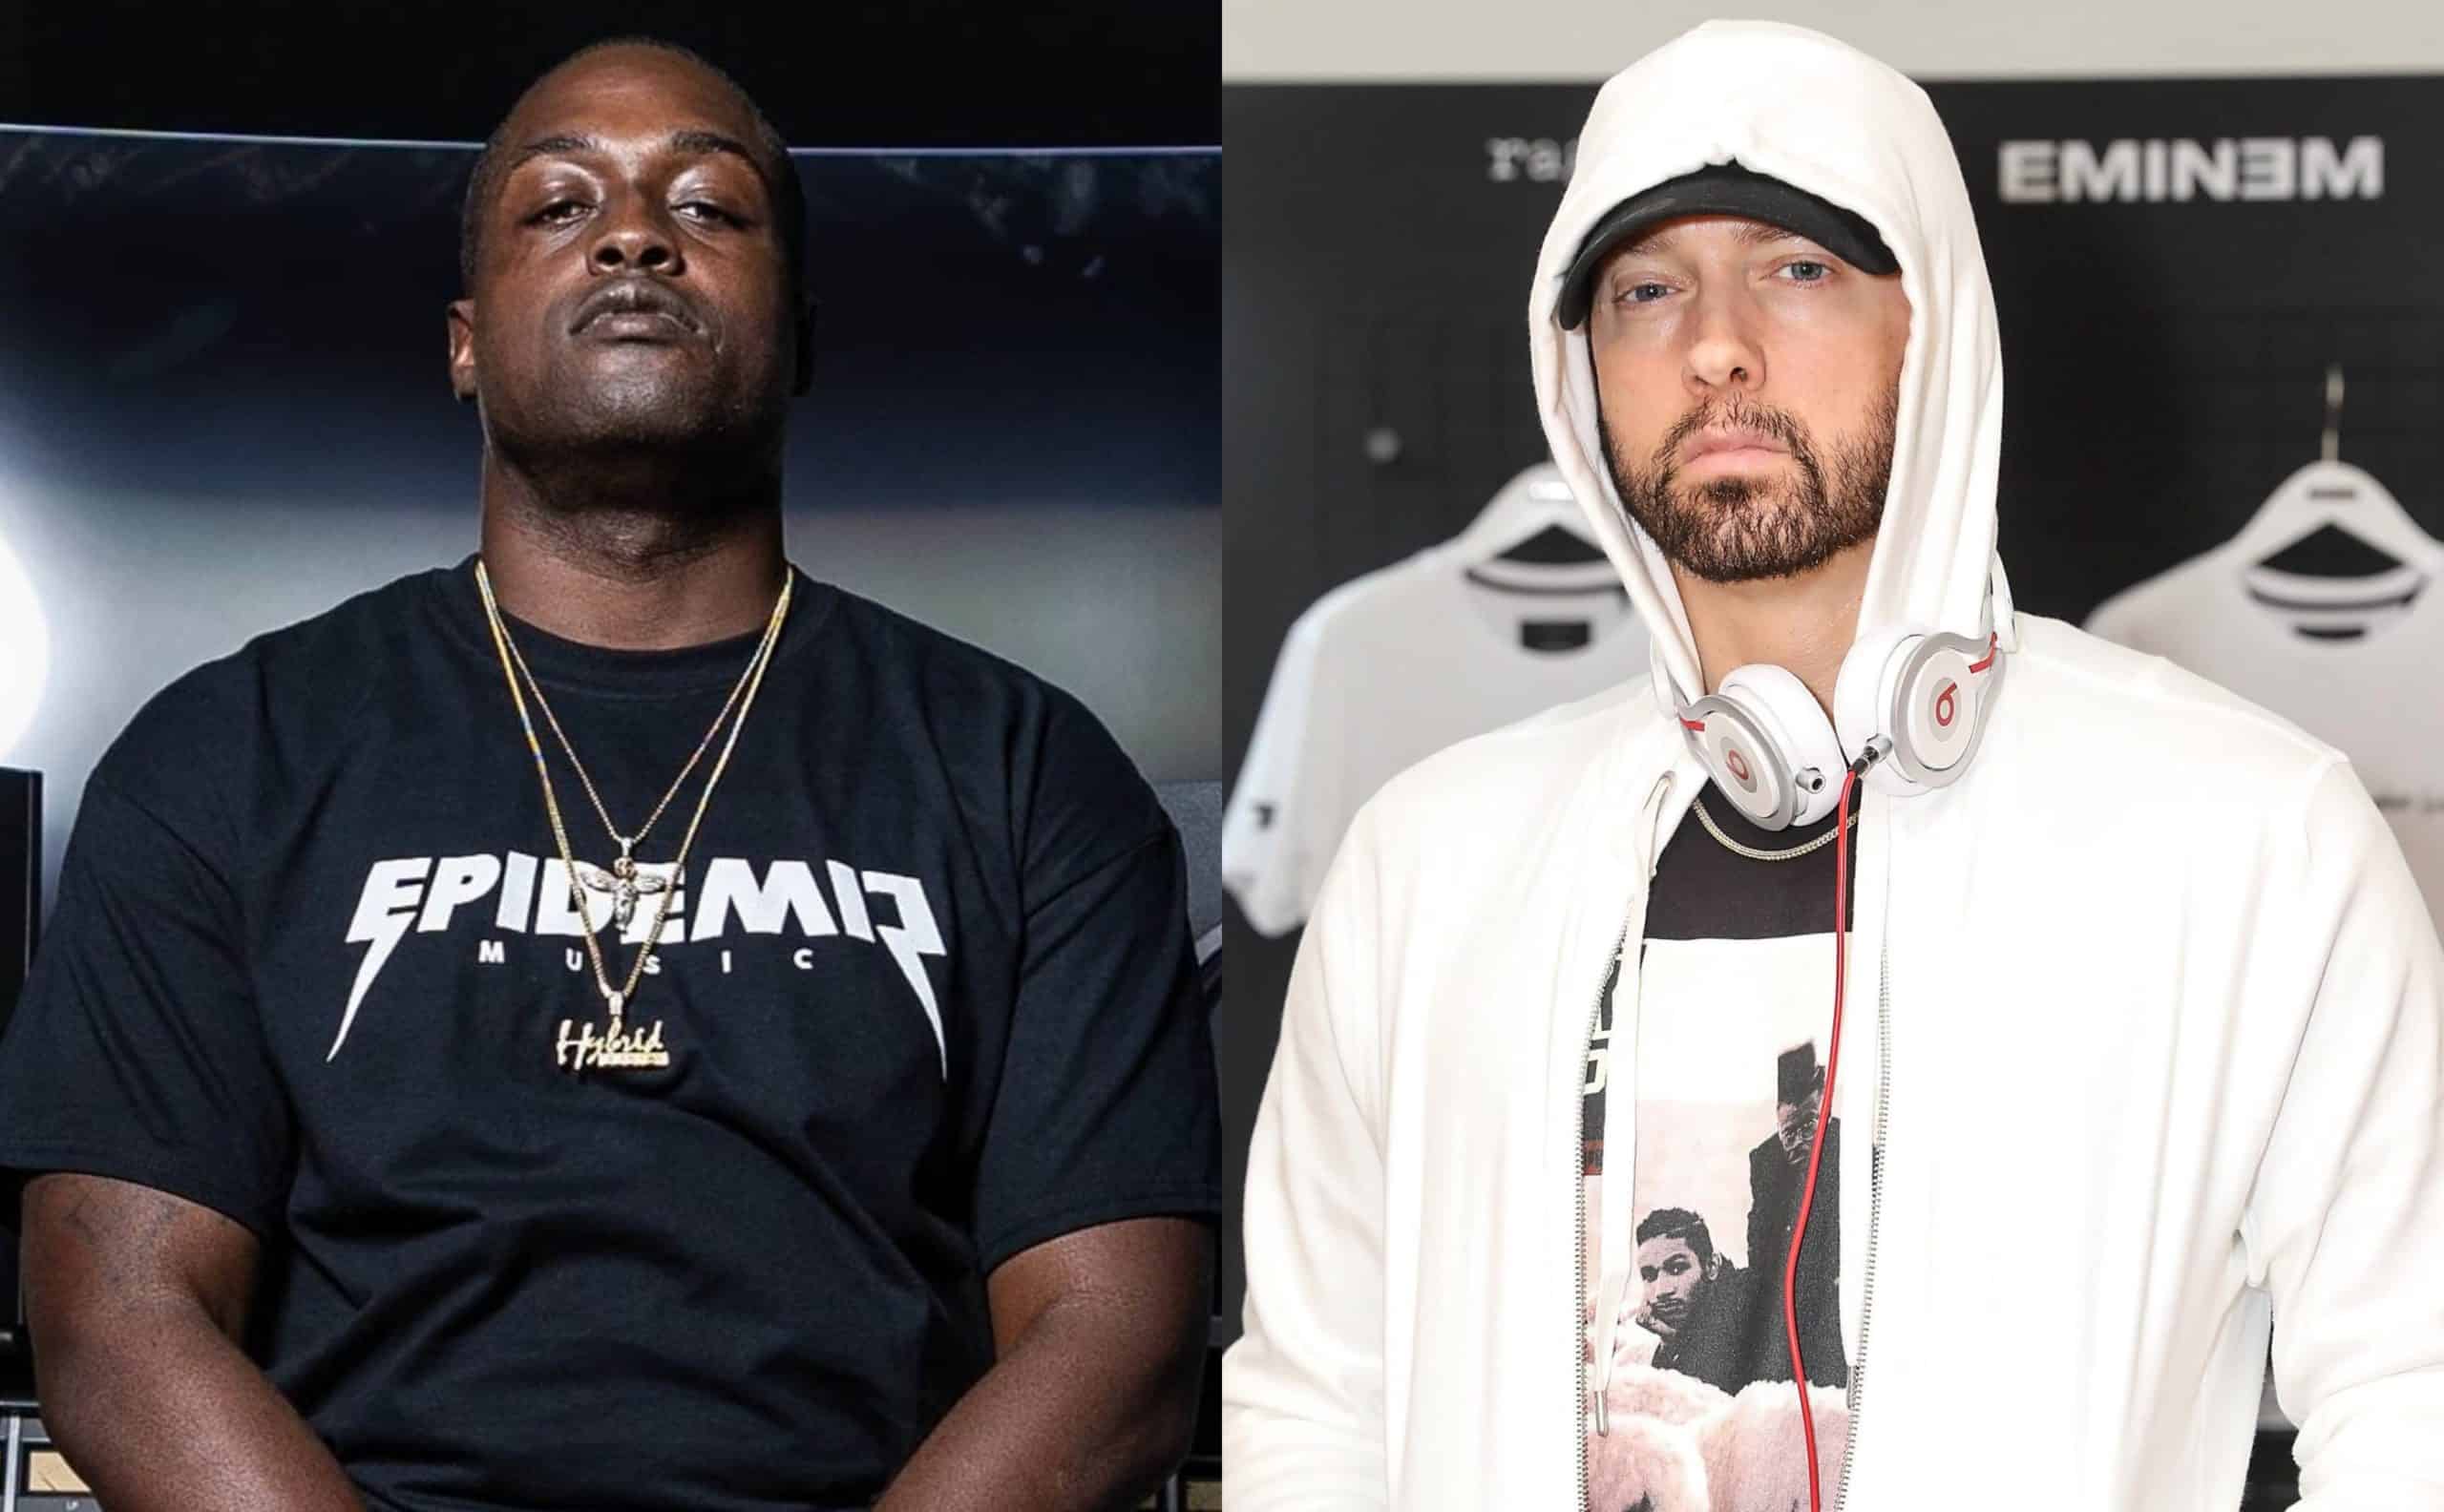 Illa Da Producer Says He Got More Hits With Eminem on the Way